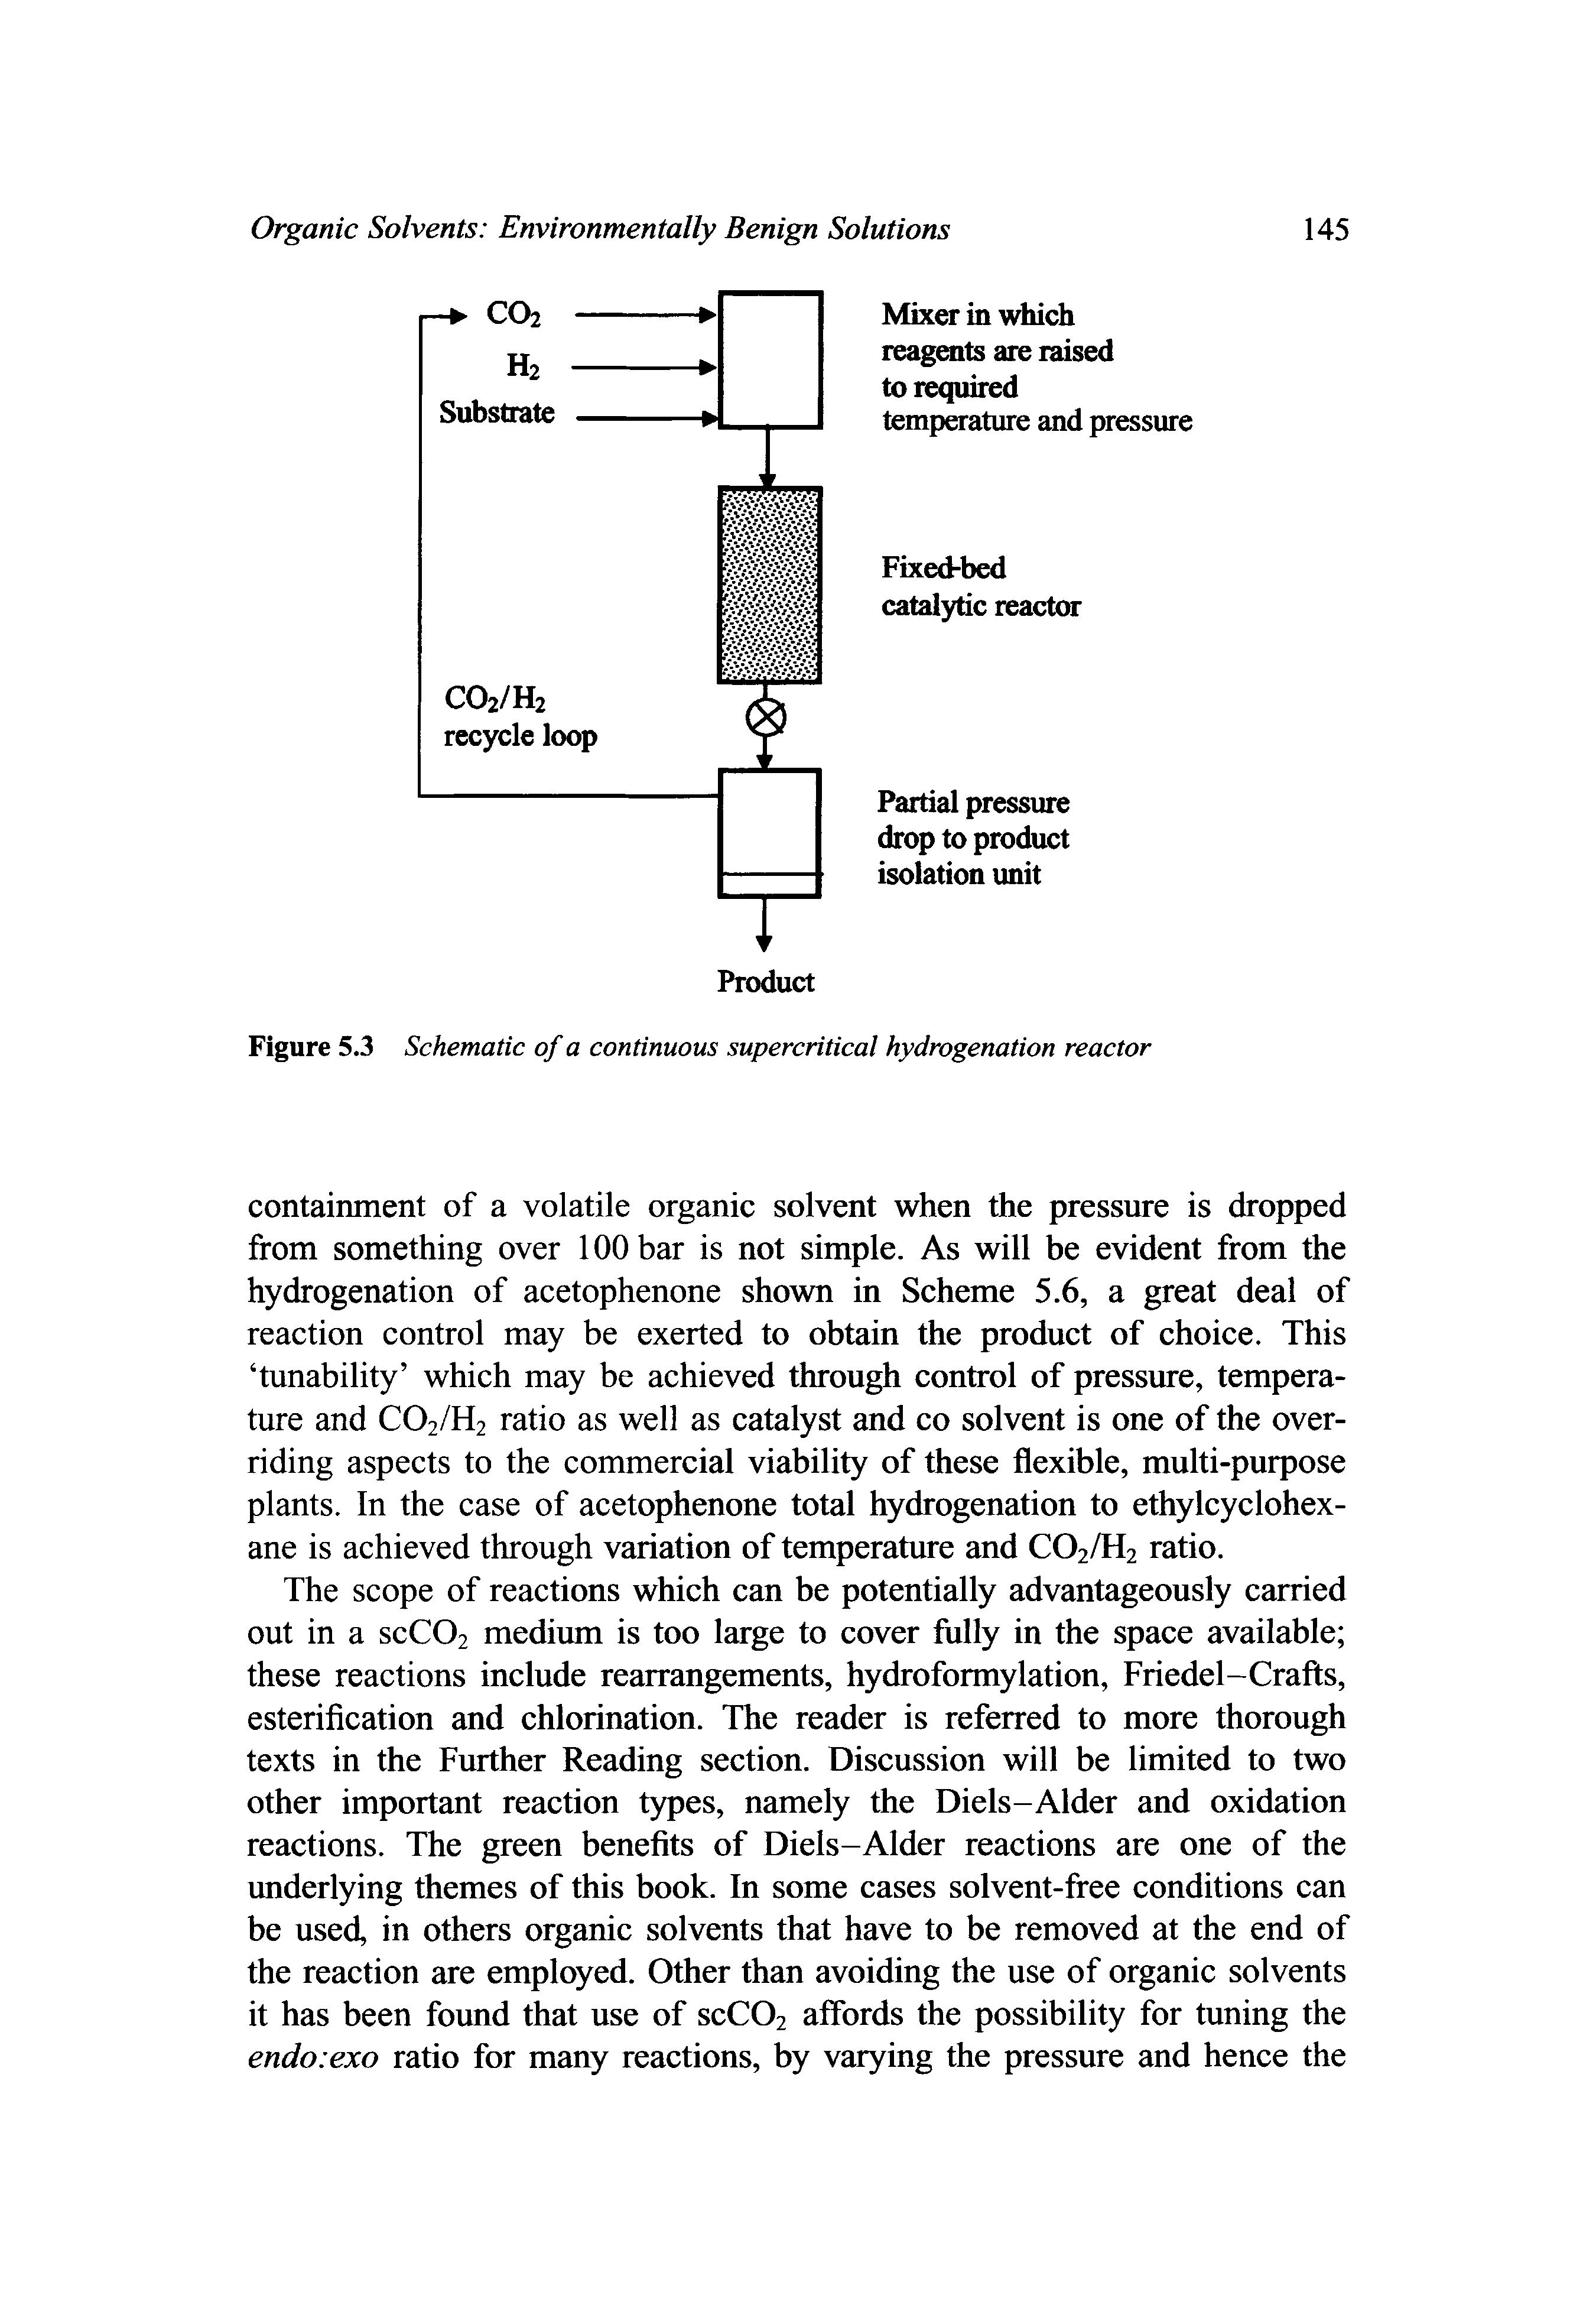 Figure 5.3 Schematic of a continuous supercritical hydrogenation reactor...